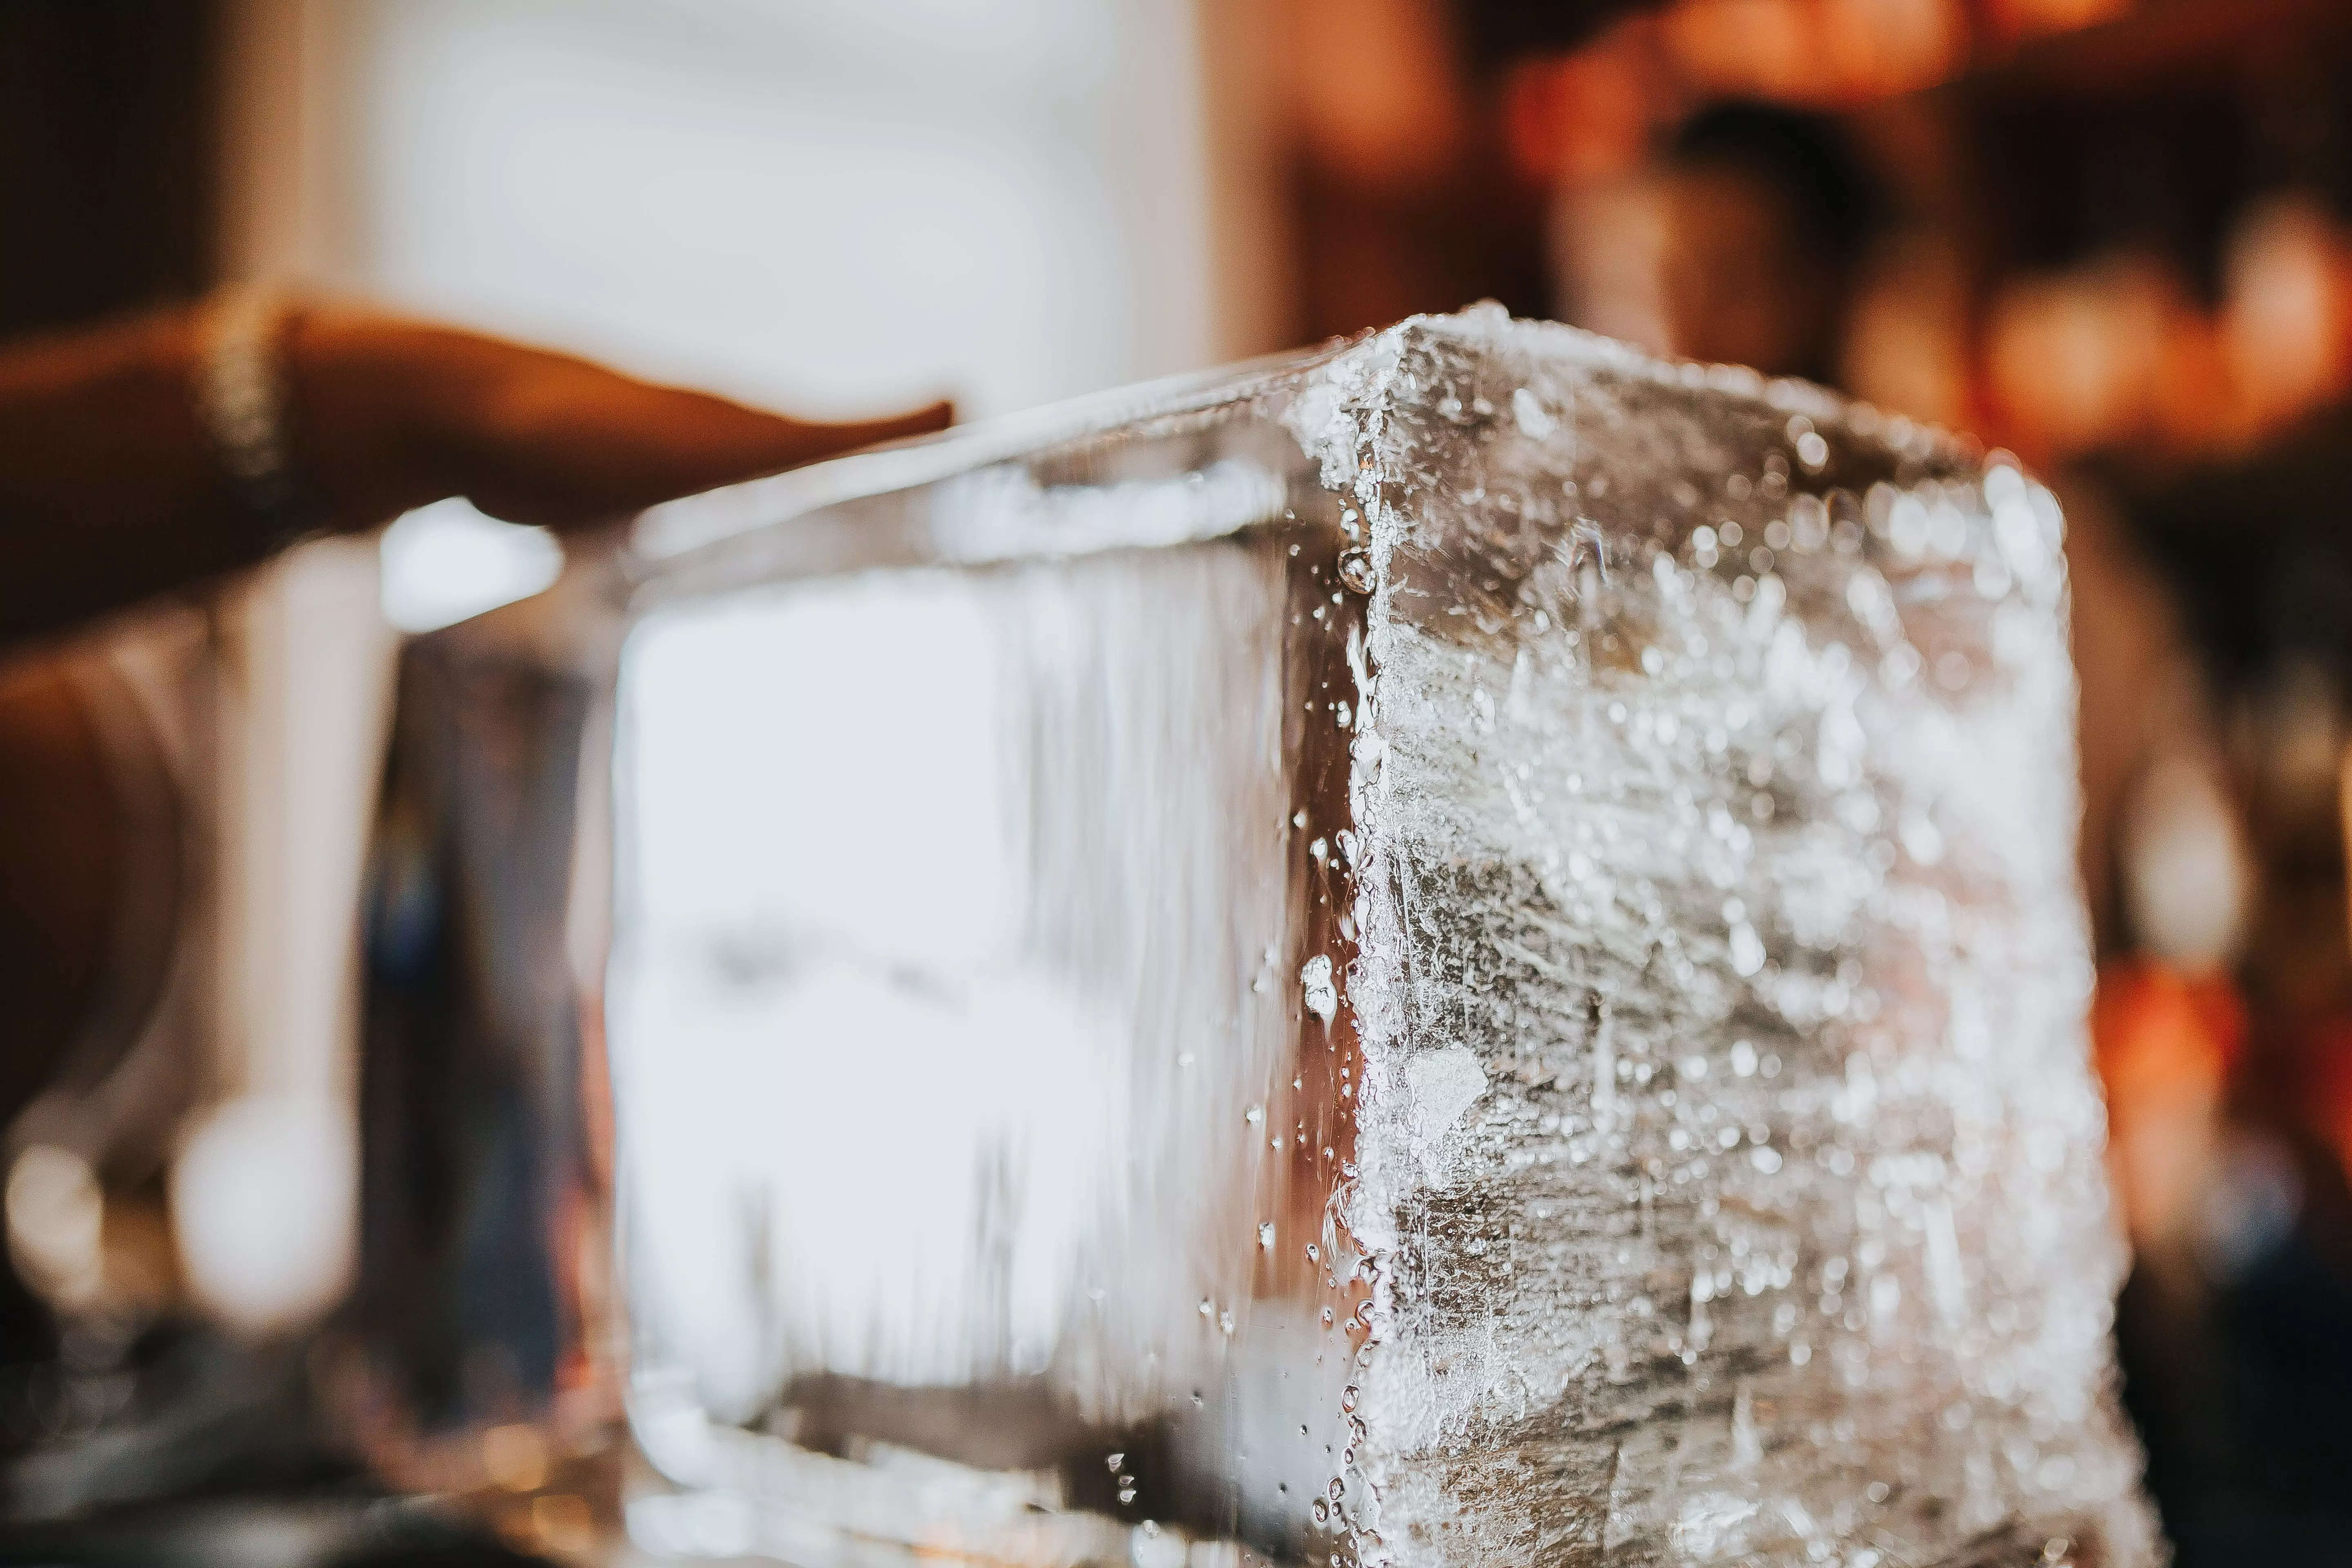 How to Make Clear Ice at Home